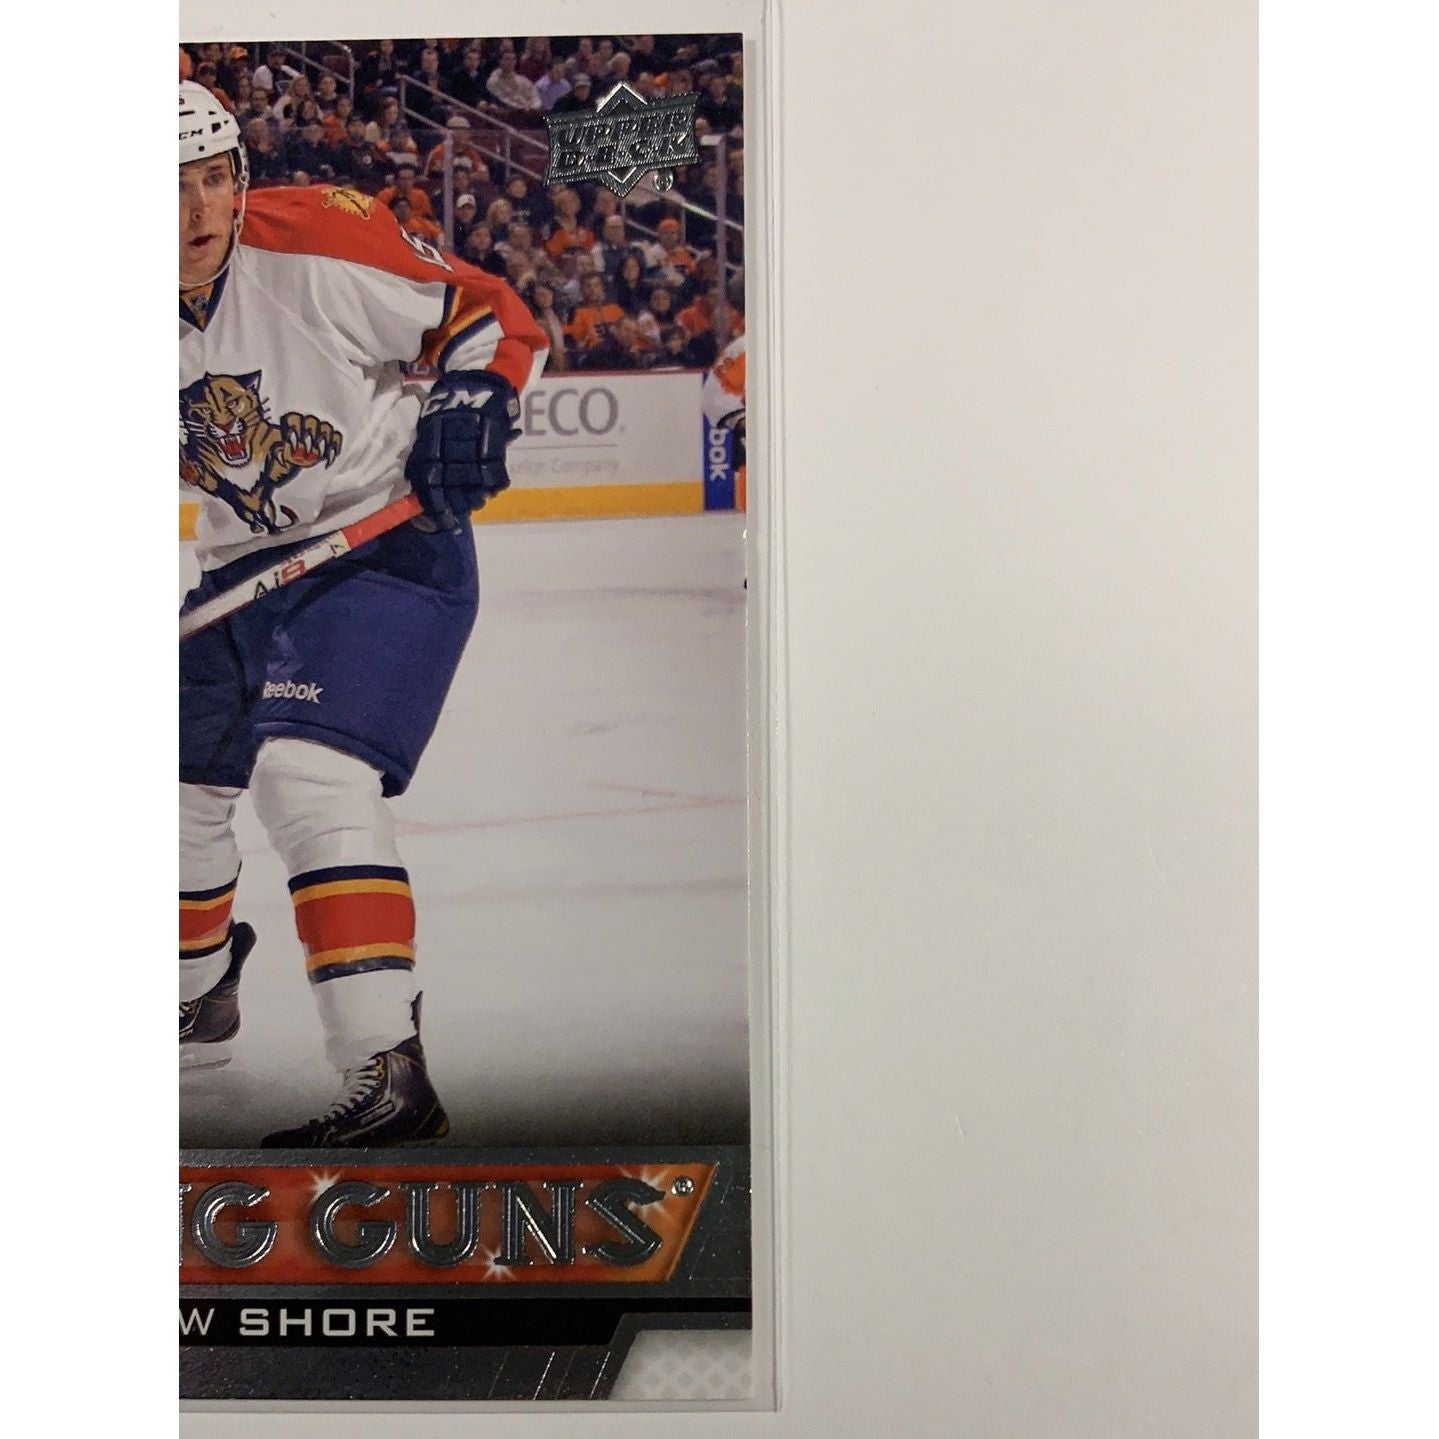  2013-14 Upper Deck Series 1 Drew Shore Young Guns  Local Legends Cards & Collectibles